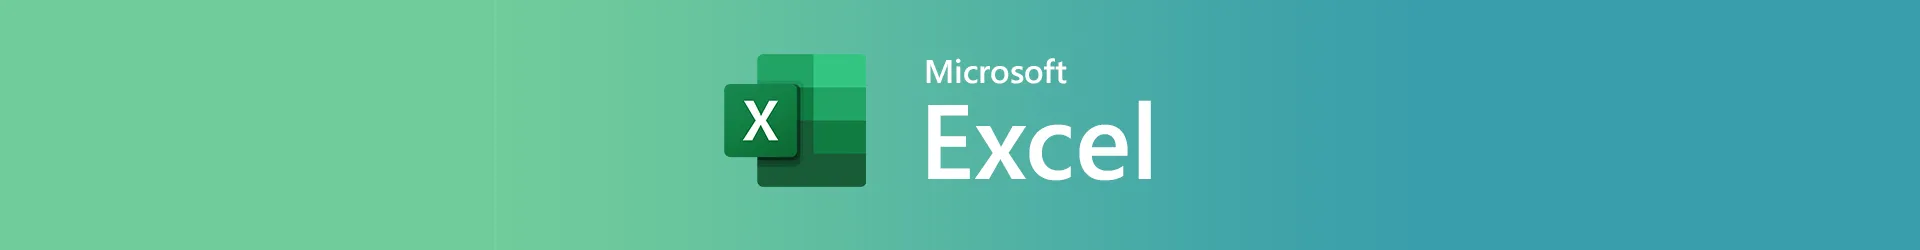 Formation Microsoft Office Excel 2019